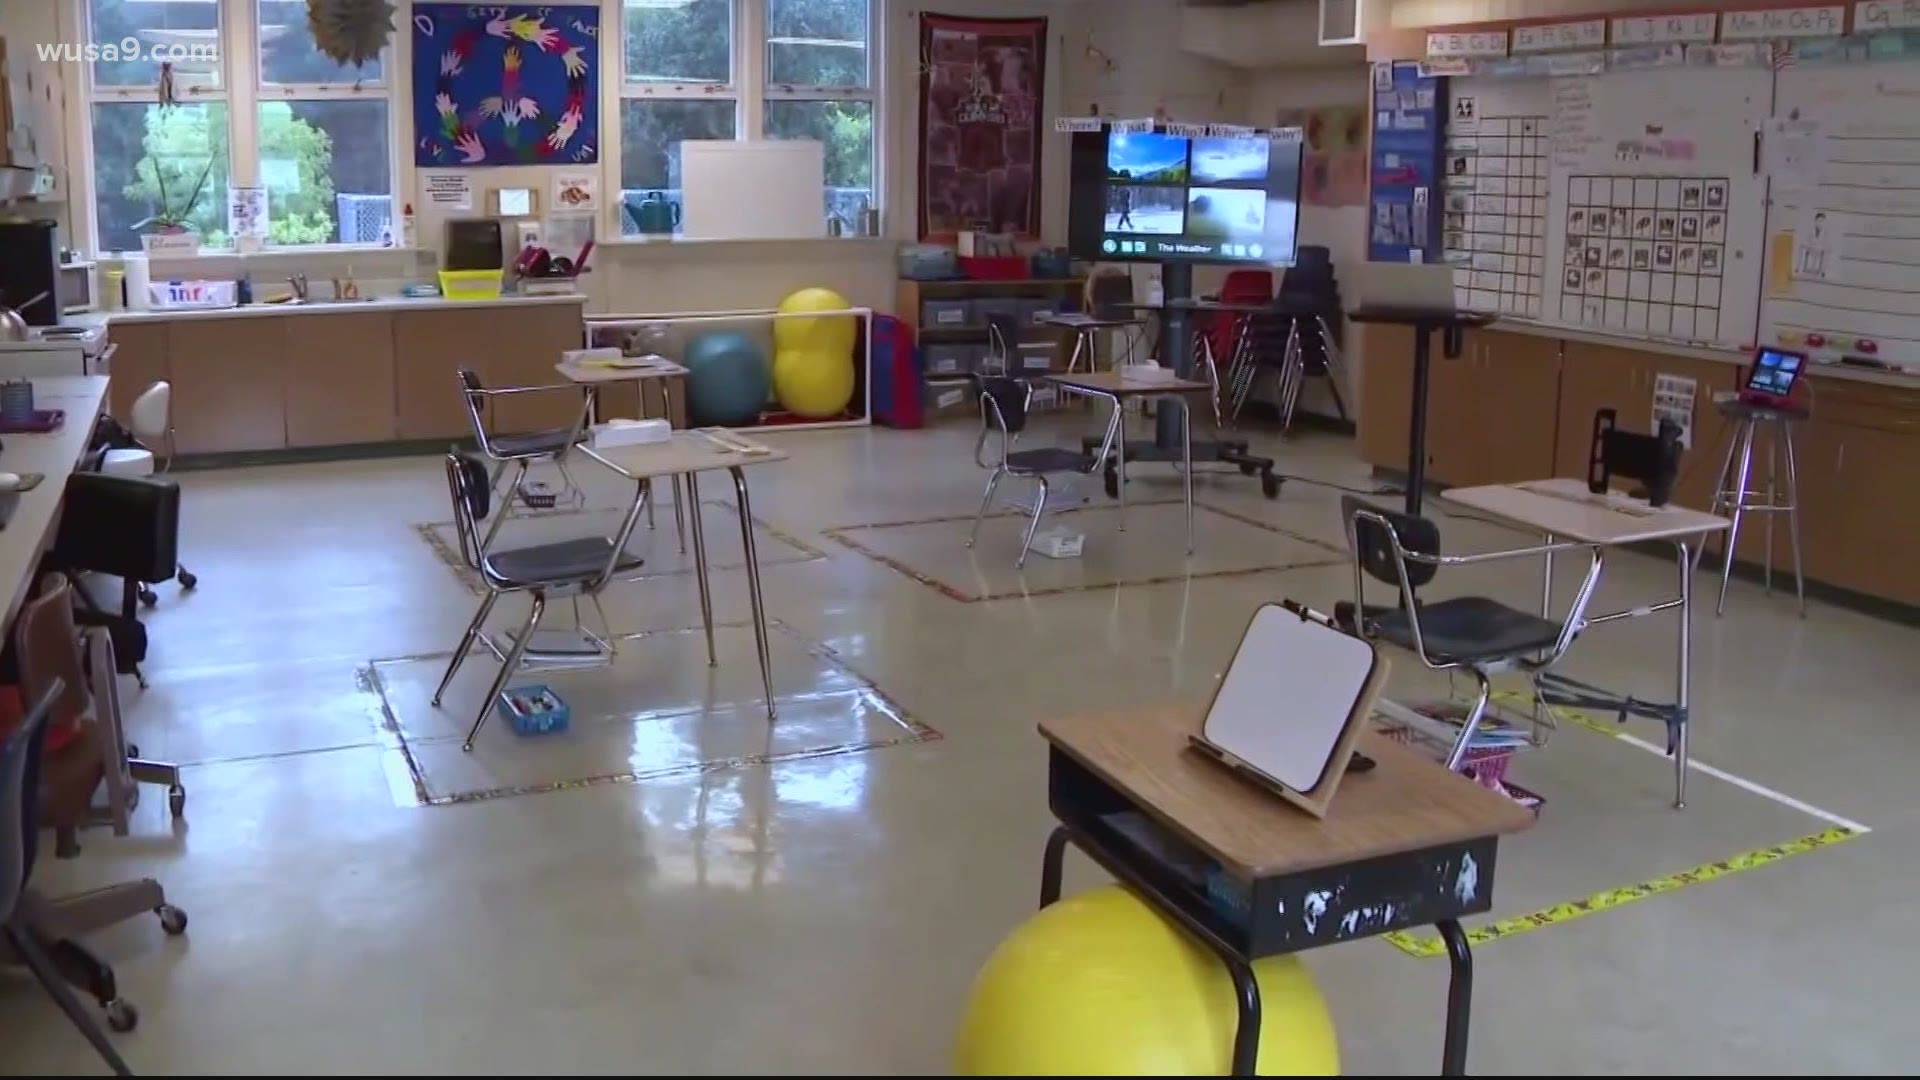 FCPS hopes to have all students back in classrooms by the fall.